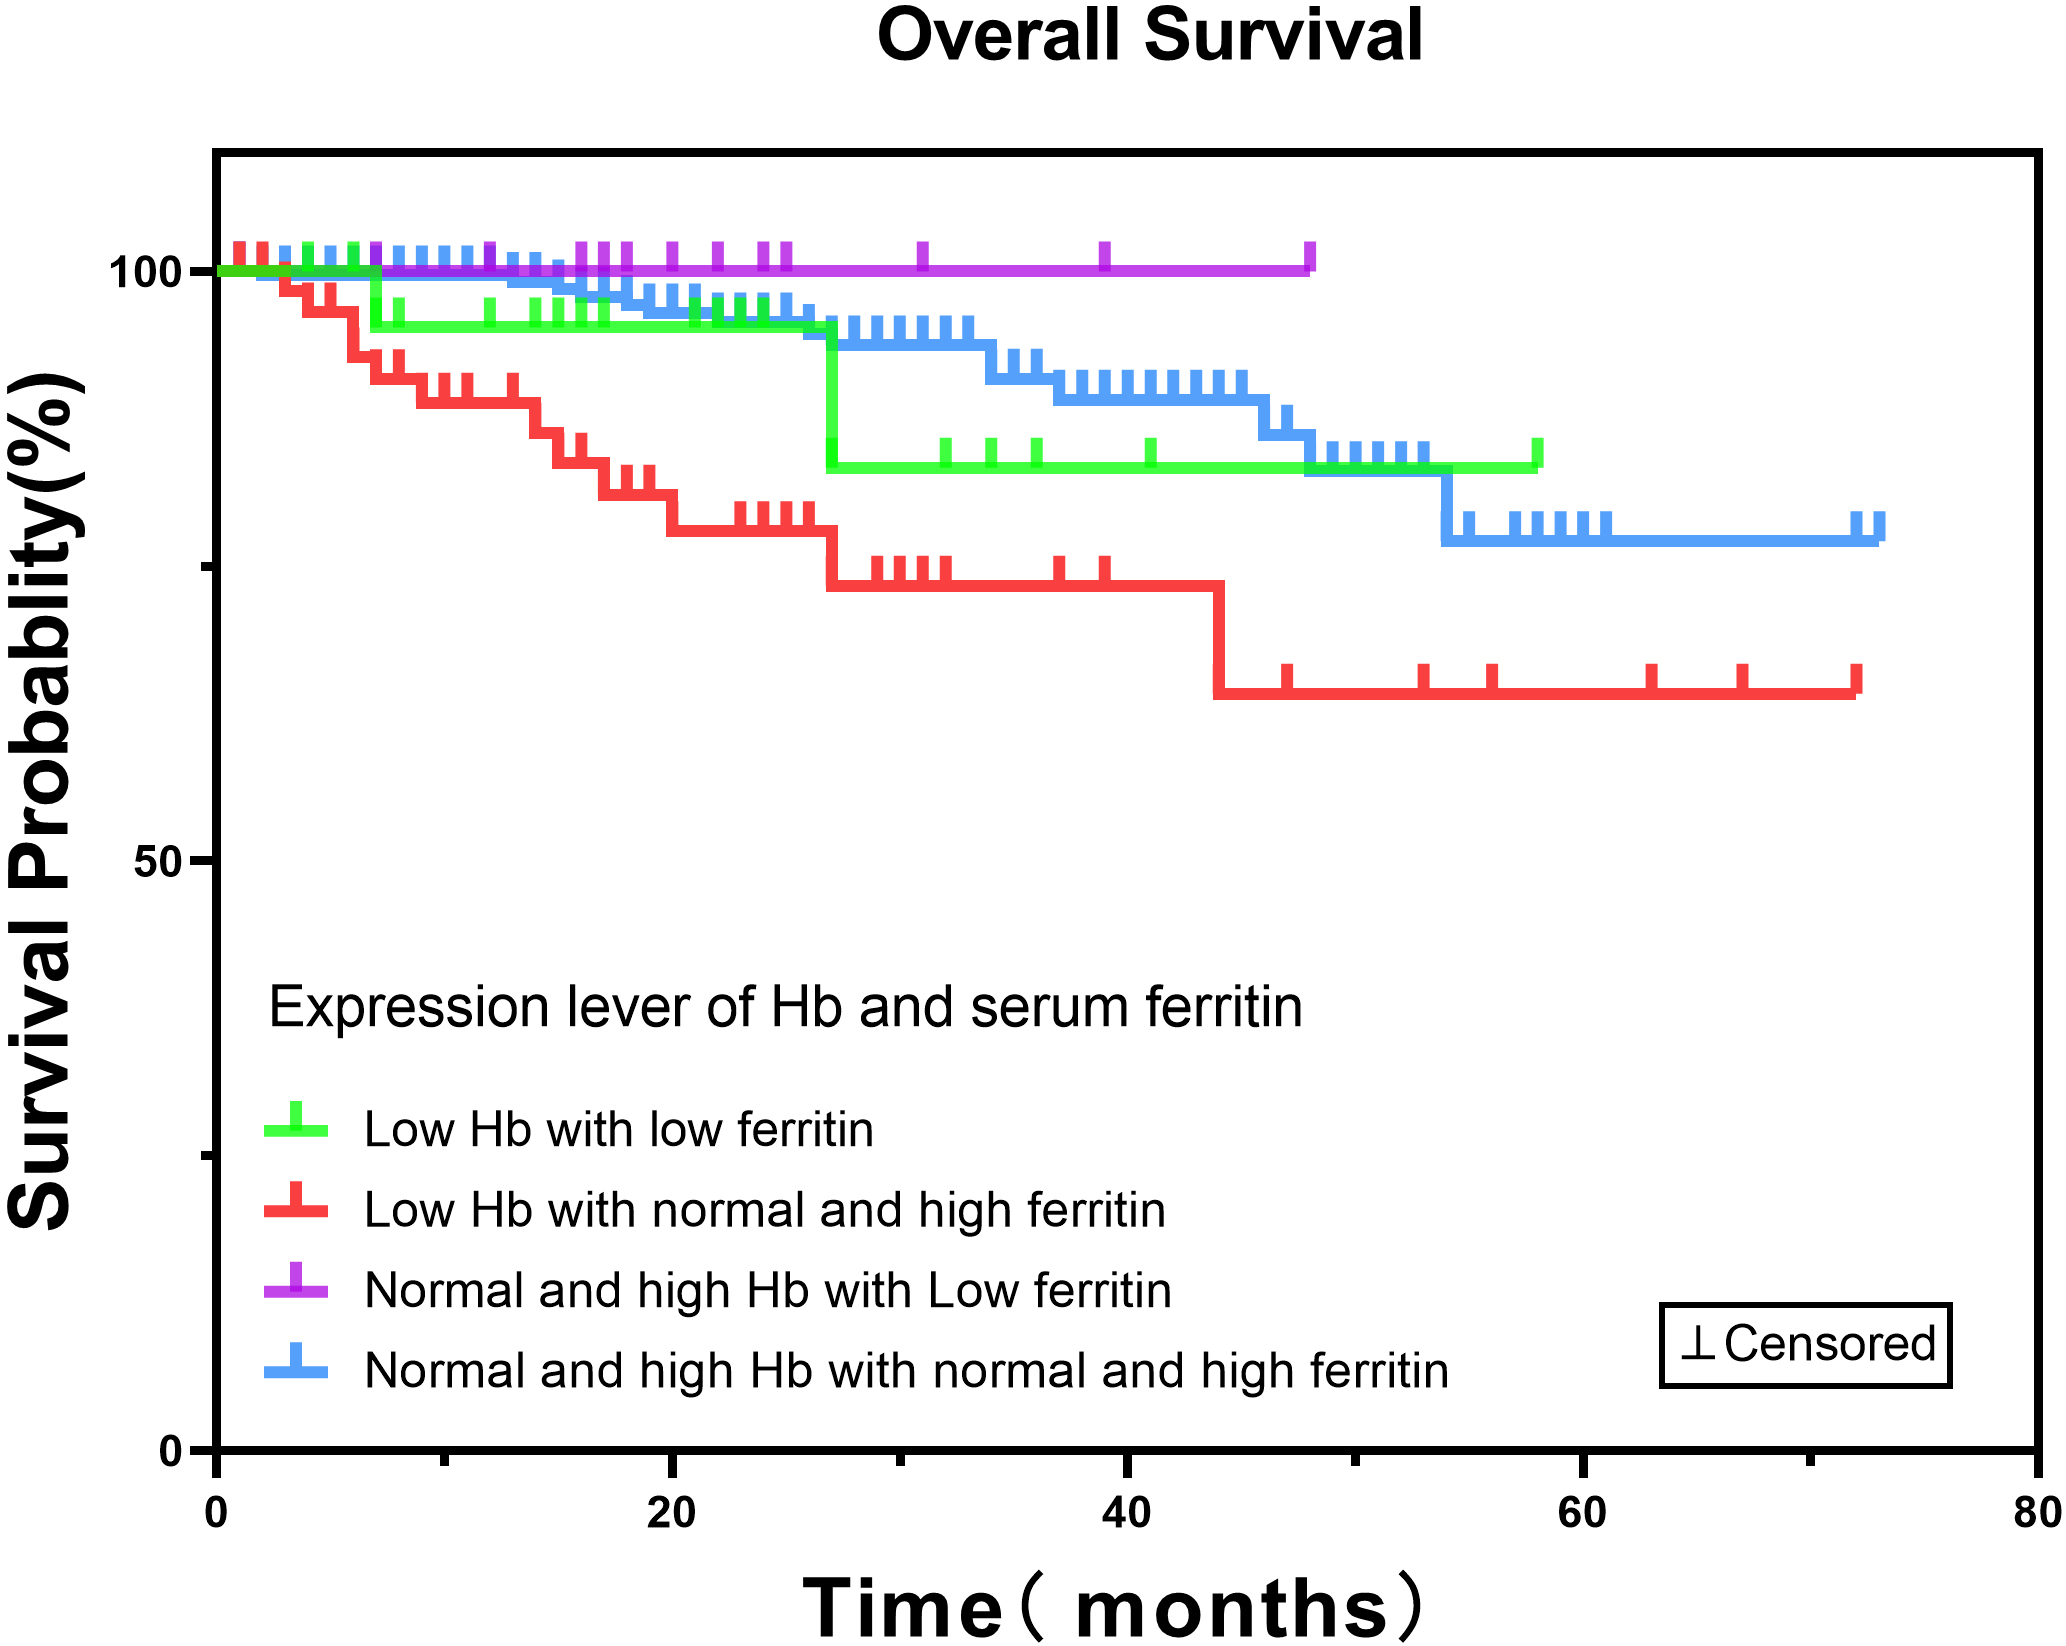 Low hemoglobin (Hb) and Low serum ferritin expression level in gynecological malignancies has no impact on overall survival. The Kaplan-Meier survival curve for 402 patients revealed that the low Hb (< 115 g/L) and Low serum ferritin (< 13 μg/L) level group had no impact on survival when compared to other groups. Low Hb with low ferritin vs. Low Hb with normal and high ferritin (⩾ 13 μg/L): P= 0.211, Low Hb with low ferritin vs. Normal and high Hb (⩾ 115 g/L) with Low ferritin: P= 0.31, Low Hb with low ferritin vs. Normal and high Hb with normal and high ferritin: P= 0.45.